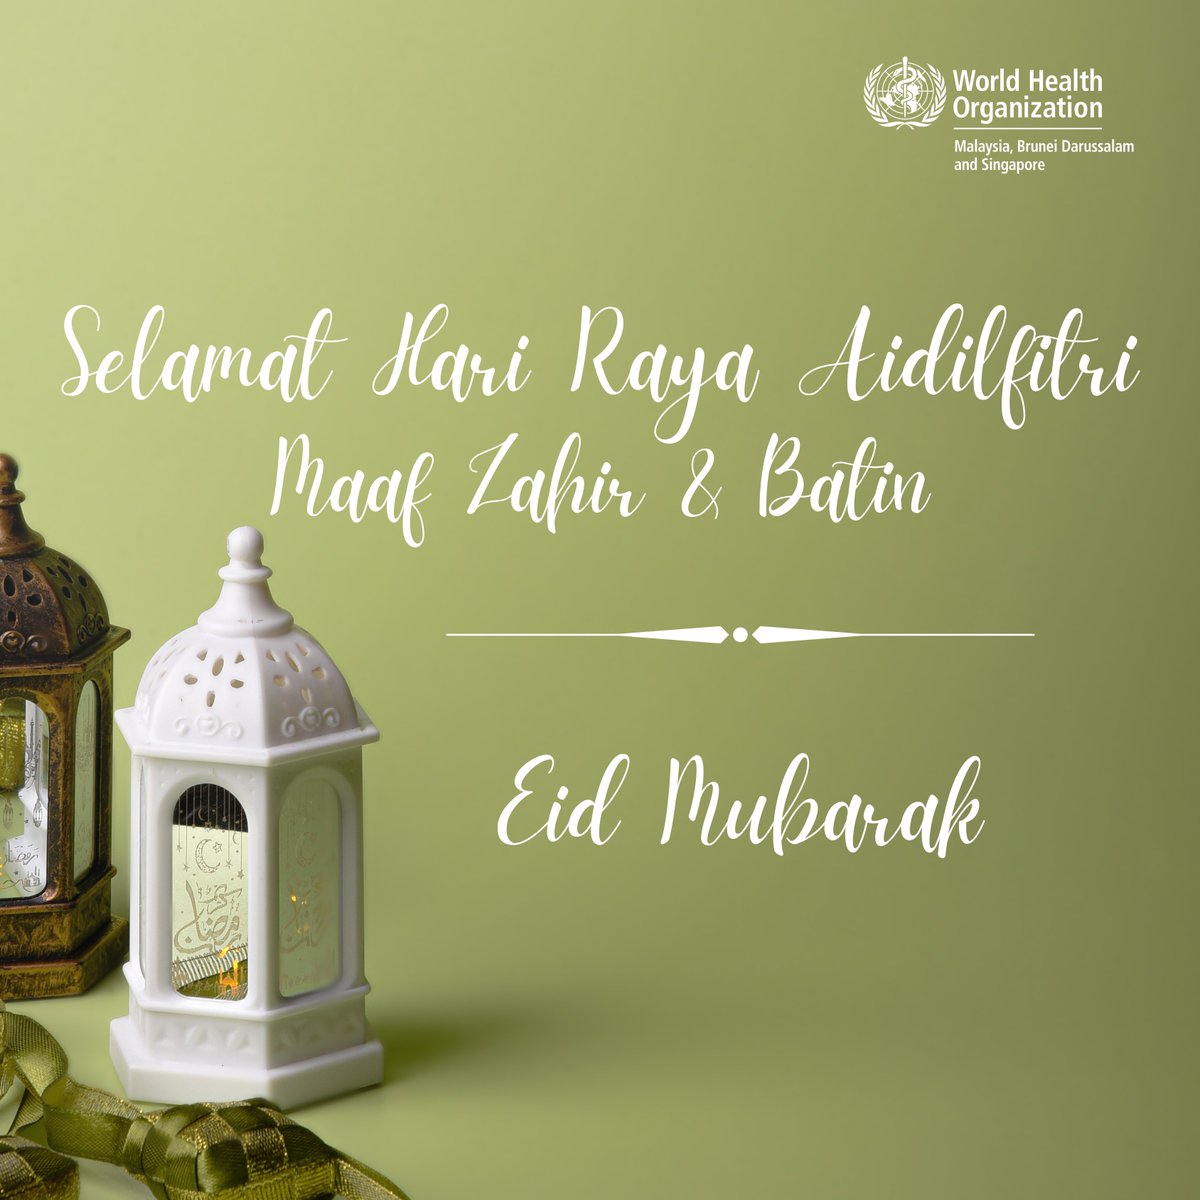 WHO Malaysia, Brunei Darussalam and Singapore wishes everyone celebrating, Selamat Hari Raya Aidilfitri, Maaf Zahir & Batin! 💫 May this celebration bring joy, happiness and good health to you and your loved ones.